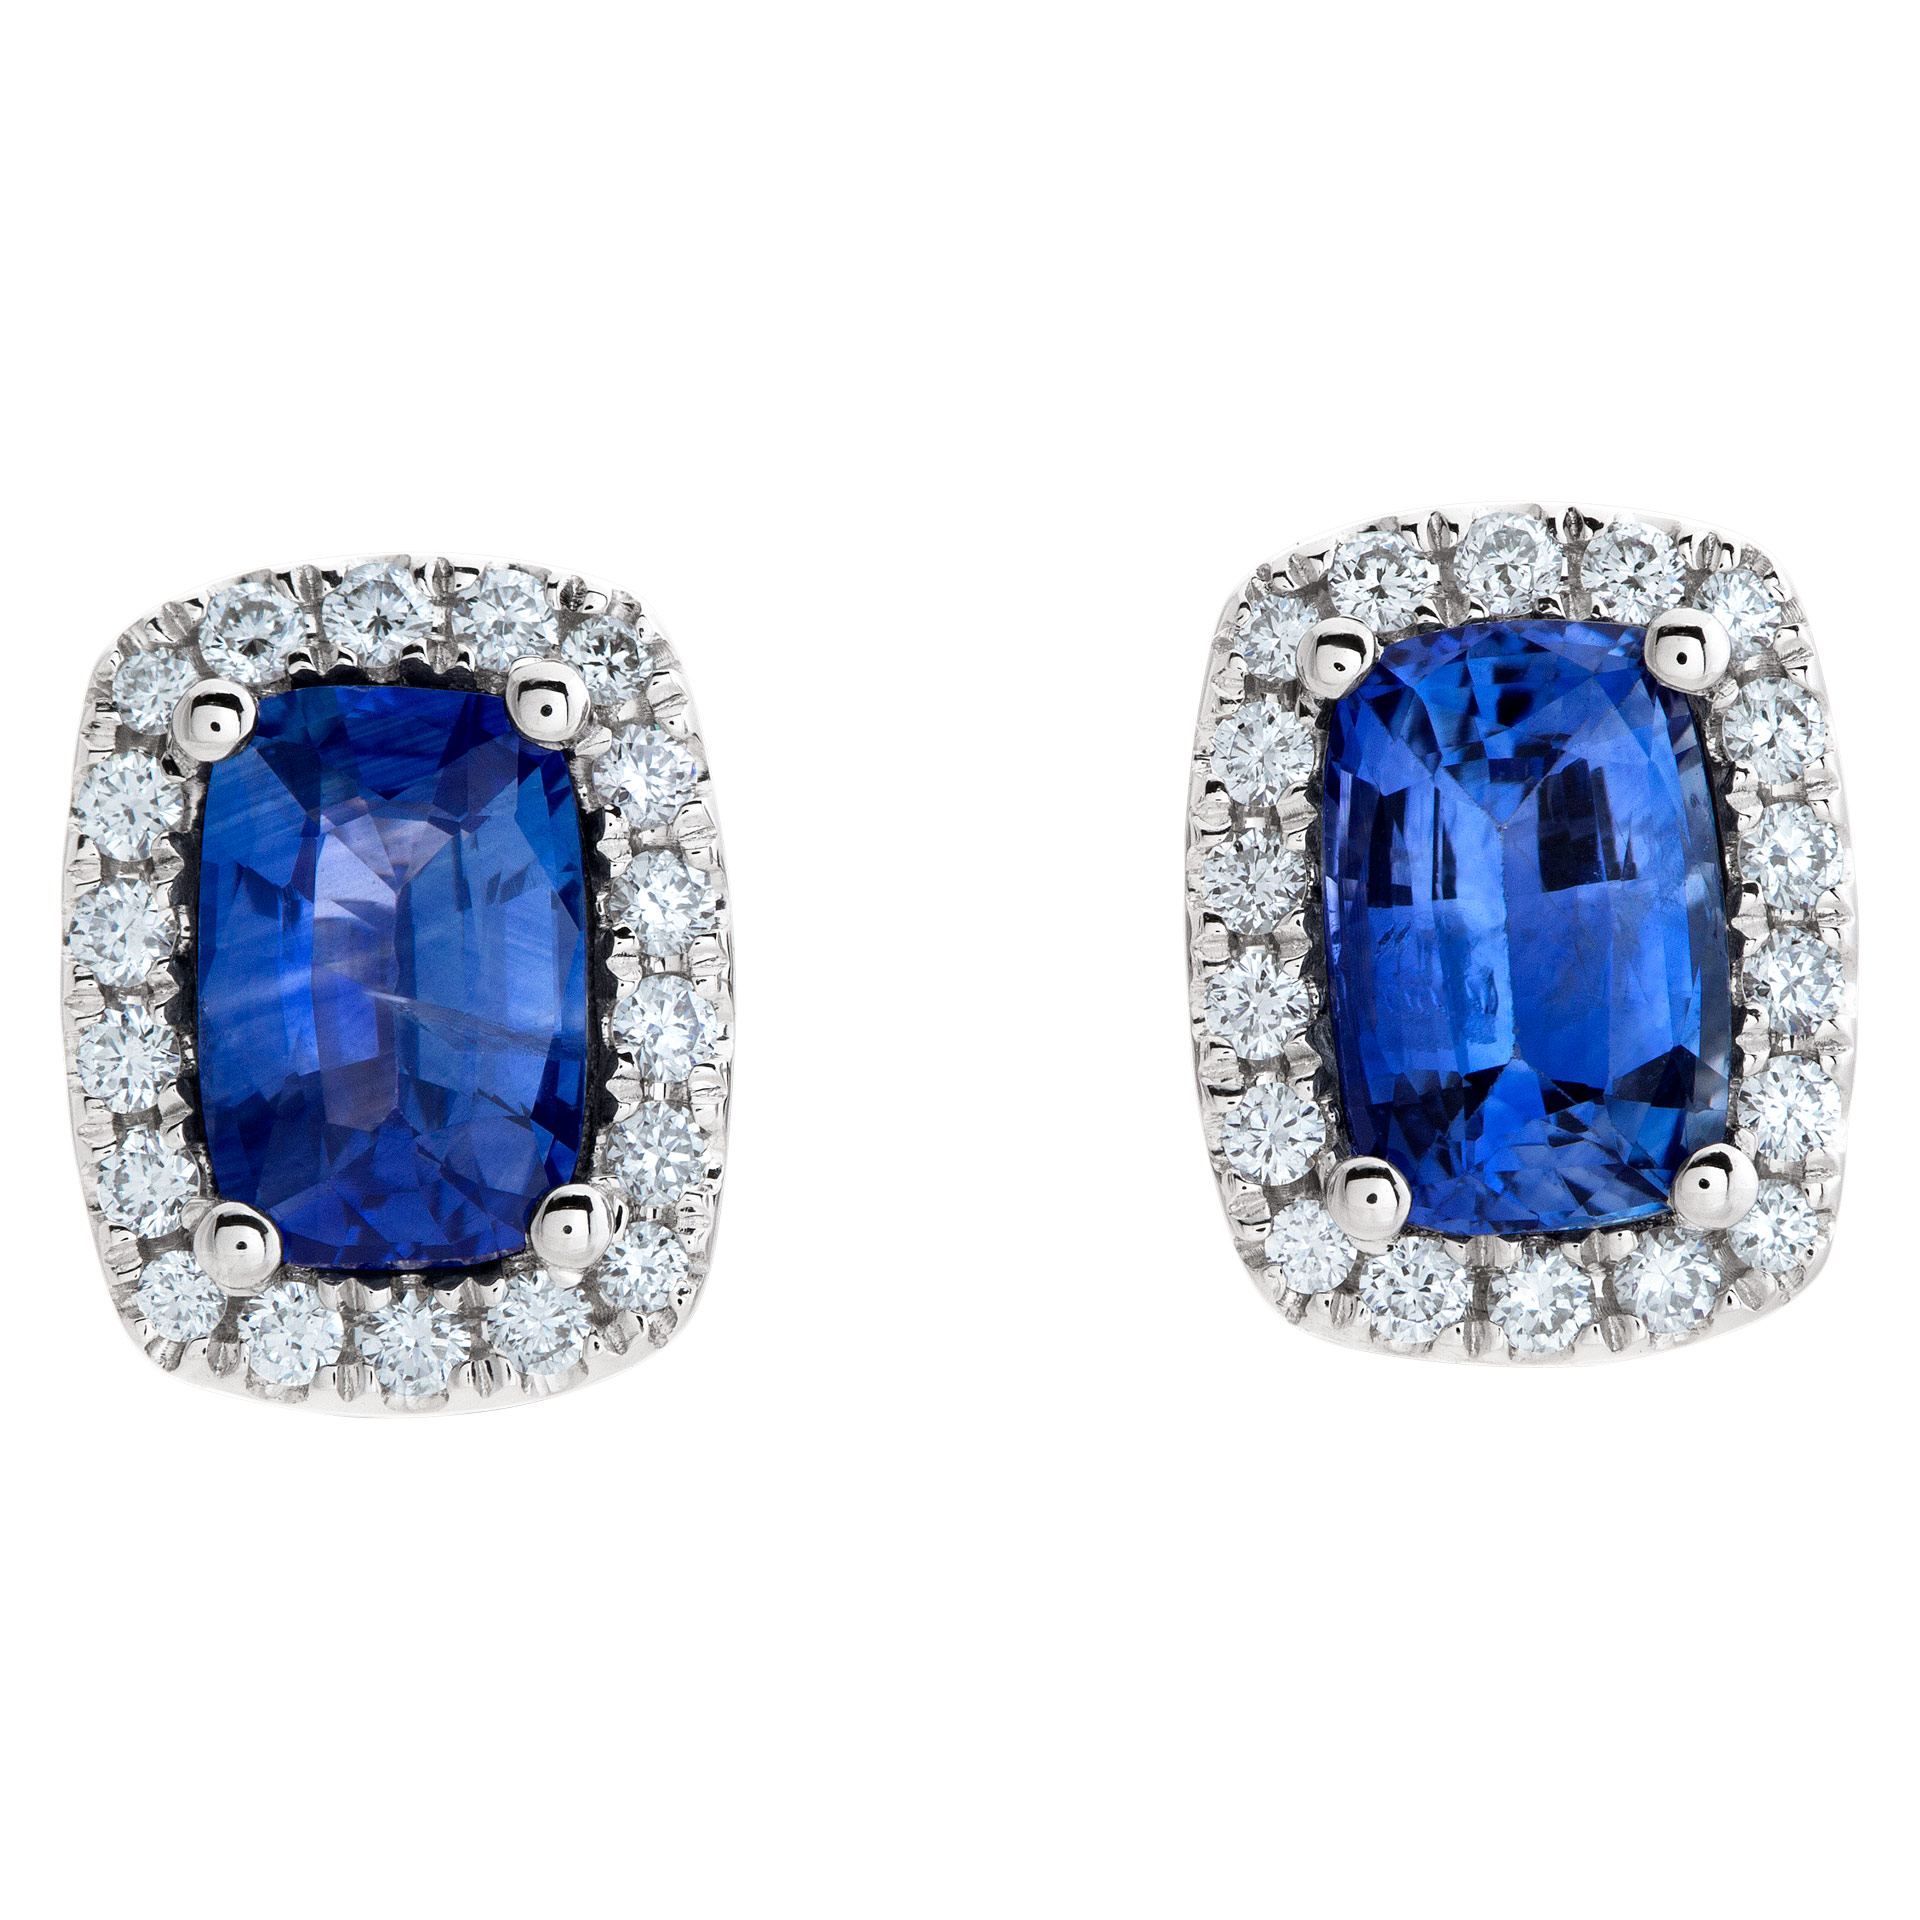 18k white gold stud earrings with 2.25 carats in blue sapphires and 0.31 carat in diamonds image 1